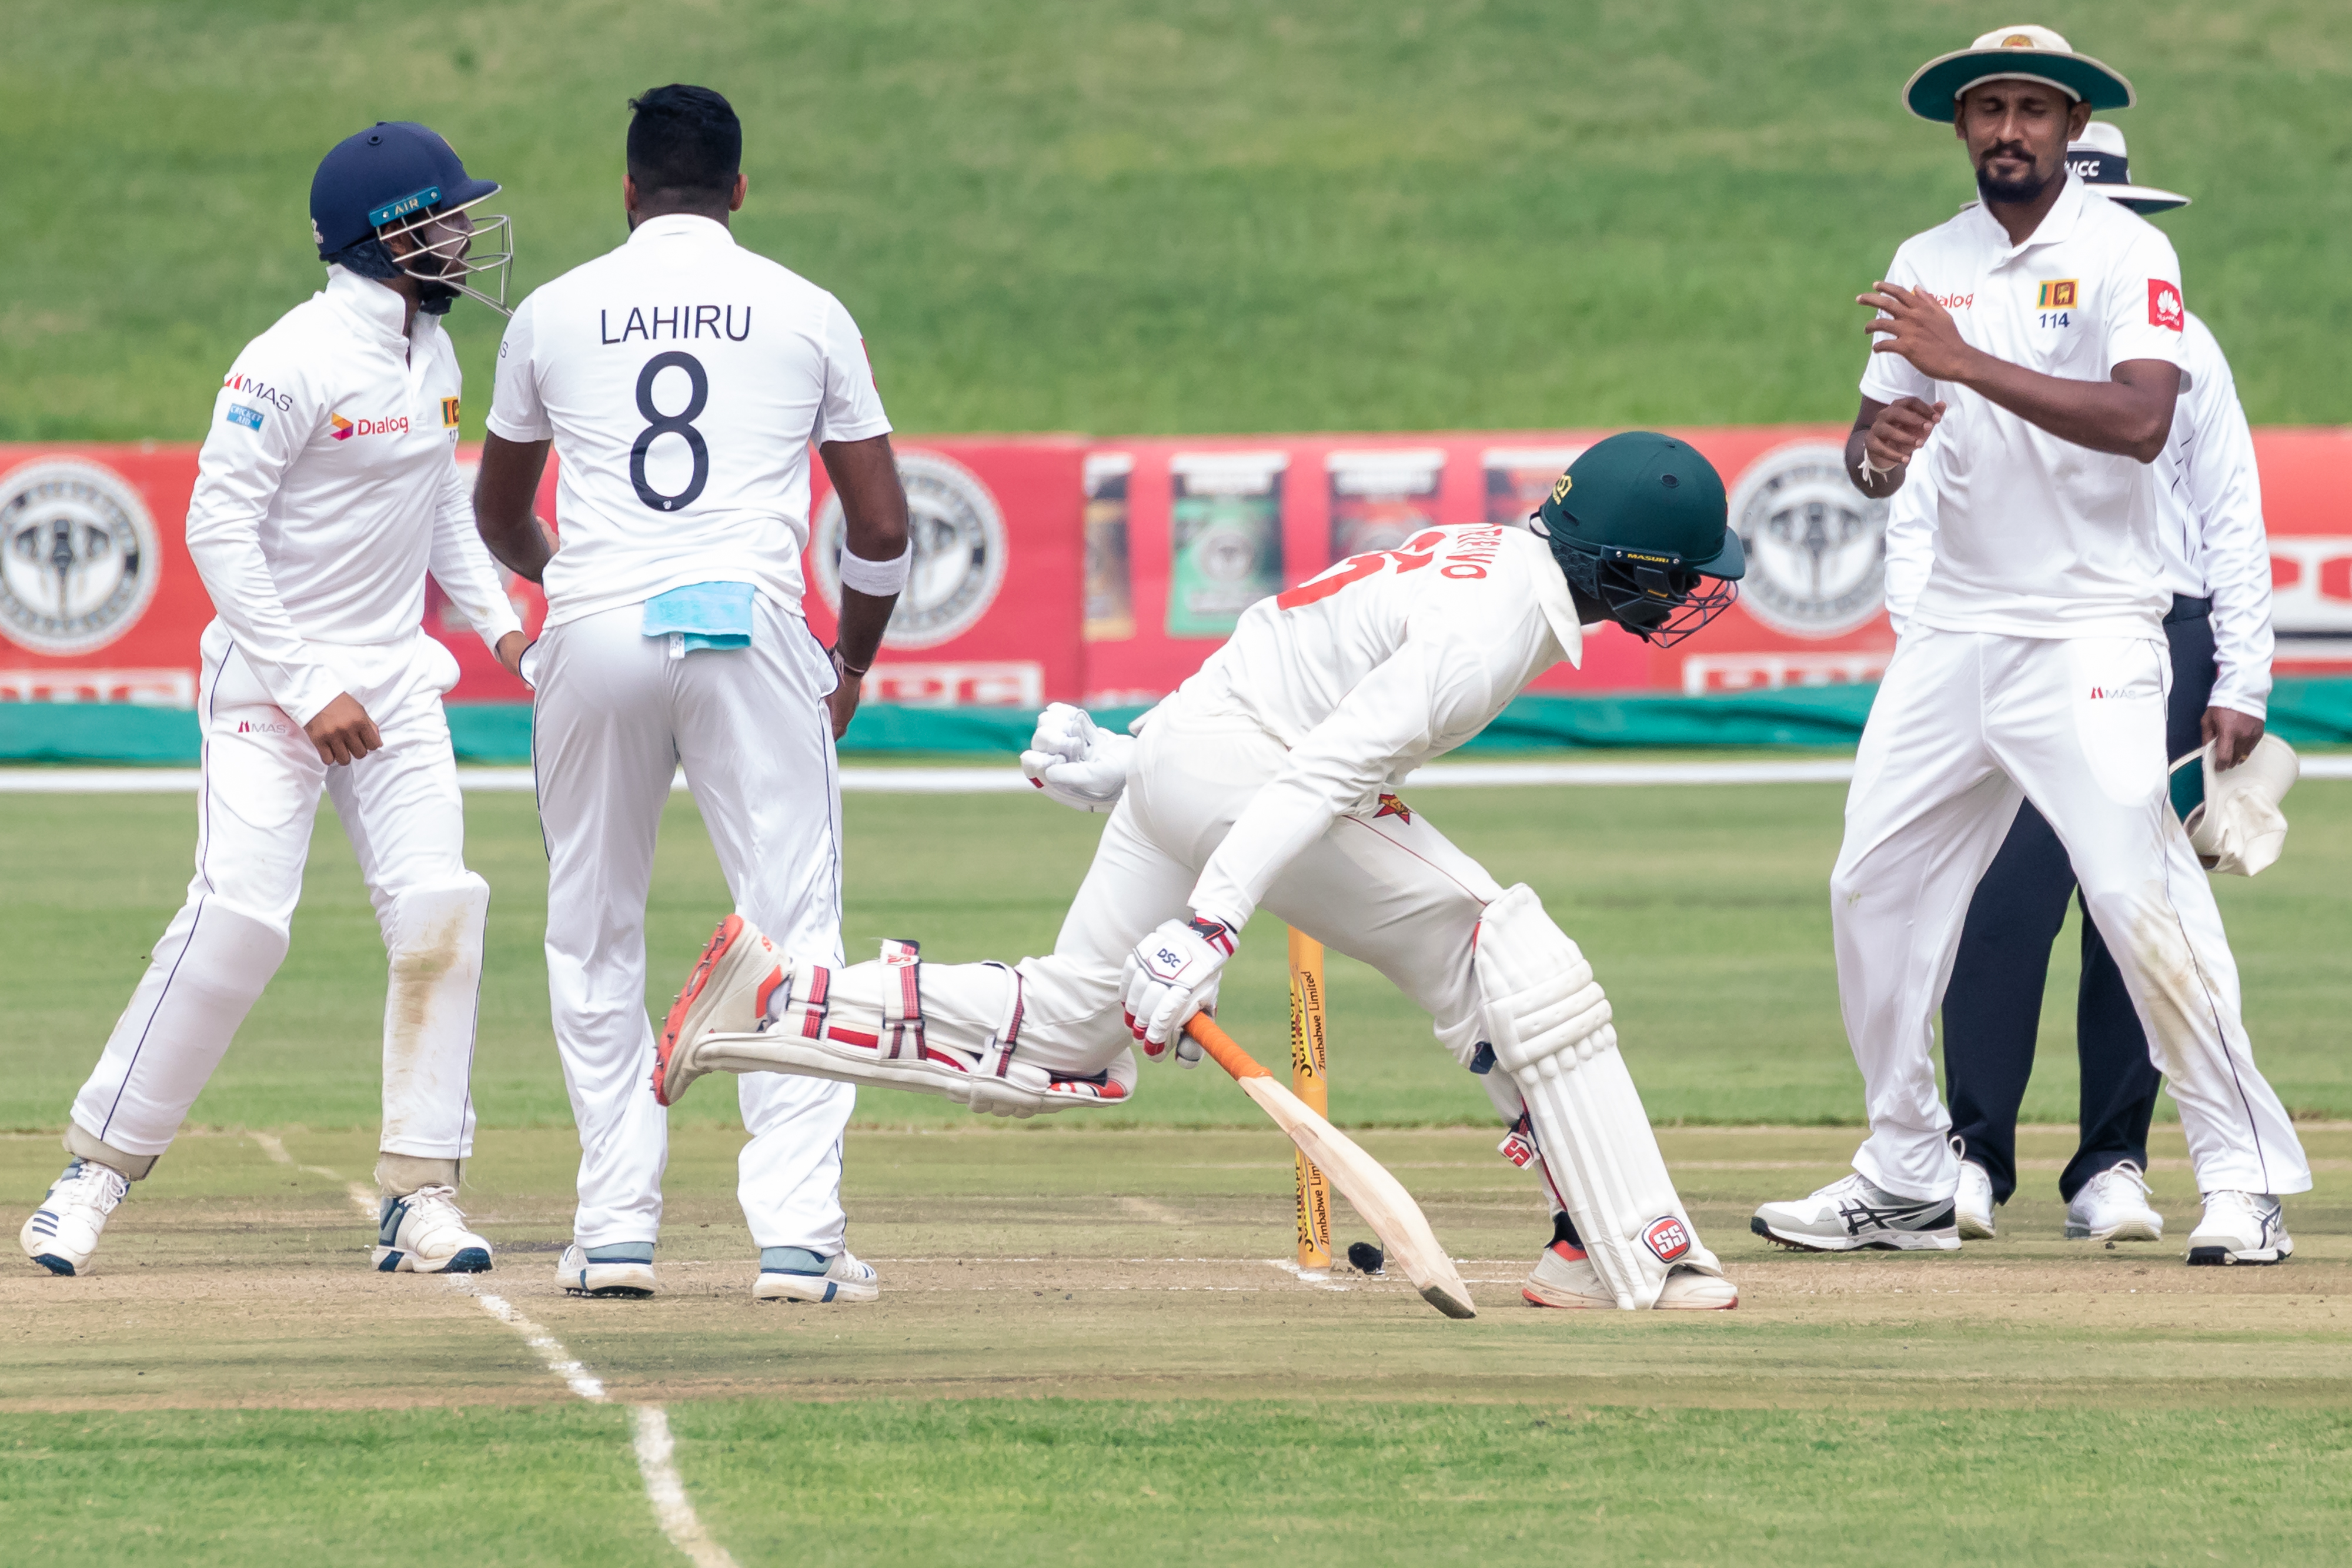 Tiripano shores up Zimbabwe after middle-order wobble